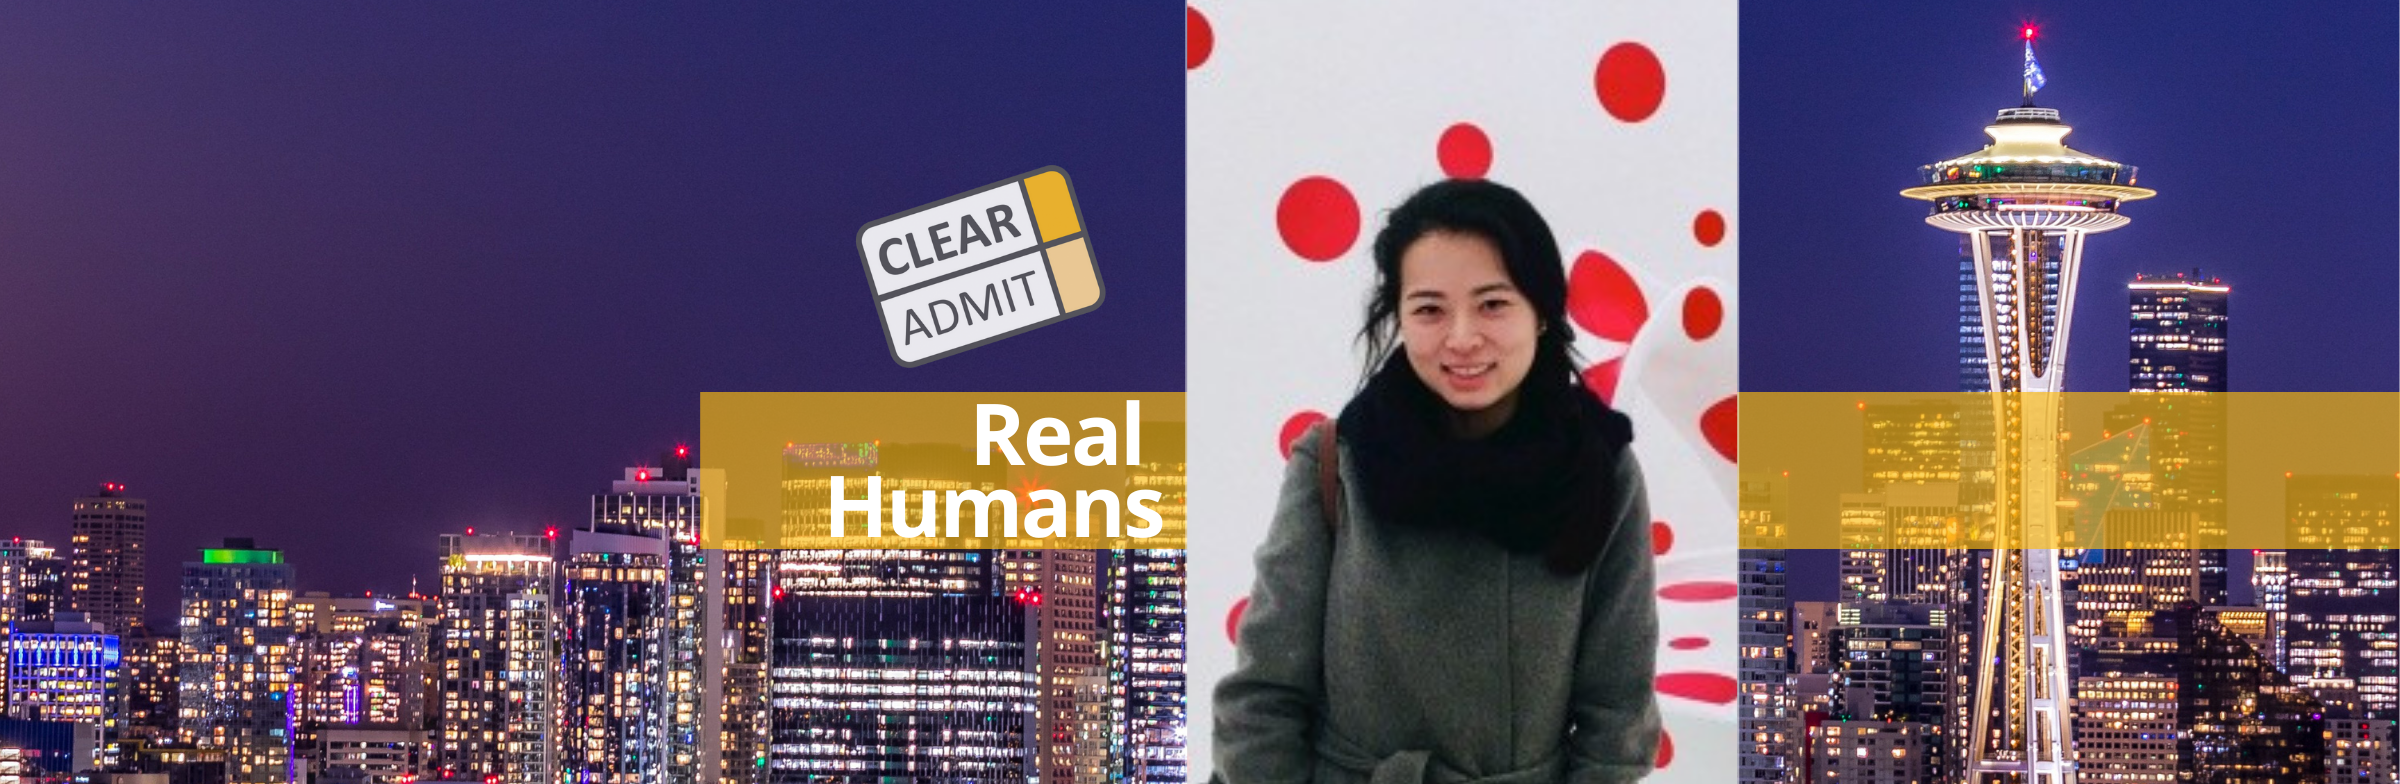 Image for Real Humans of Amazon: Vienna Chen, Wharton MBA ’20, Senior Product Manager Technical